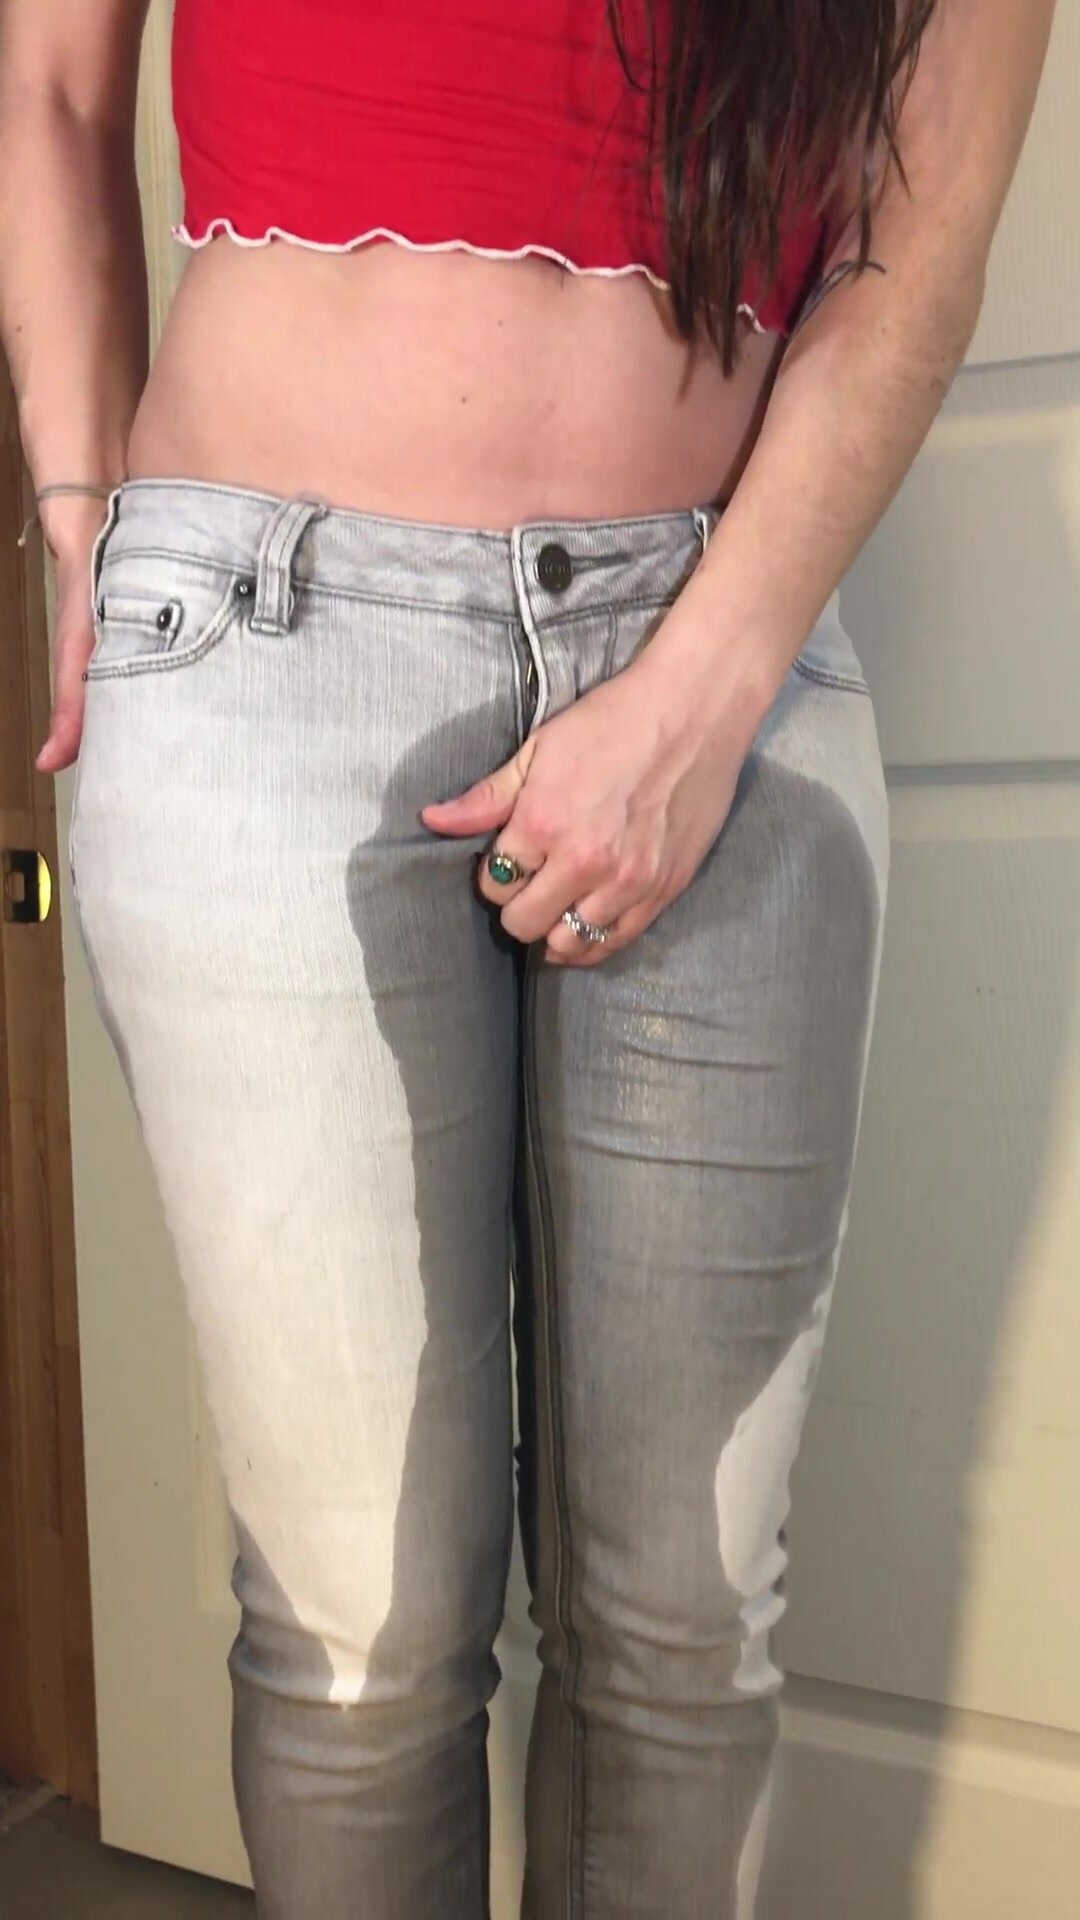 Soaking my tight jeans in high heels